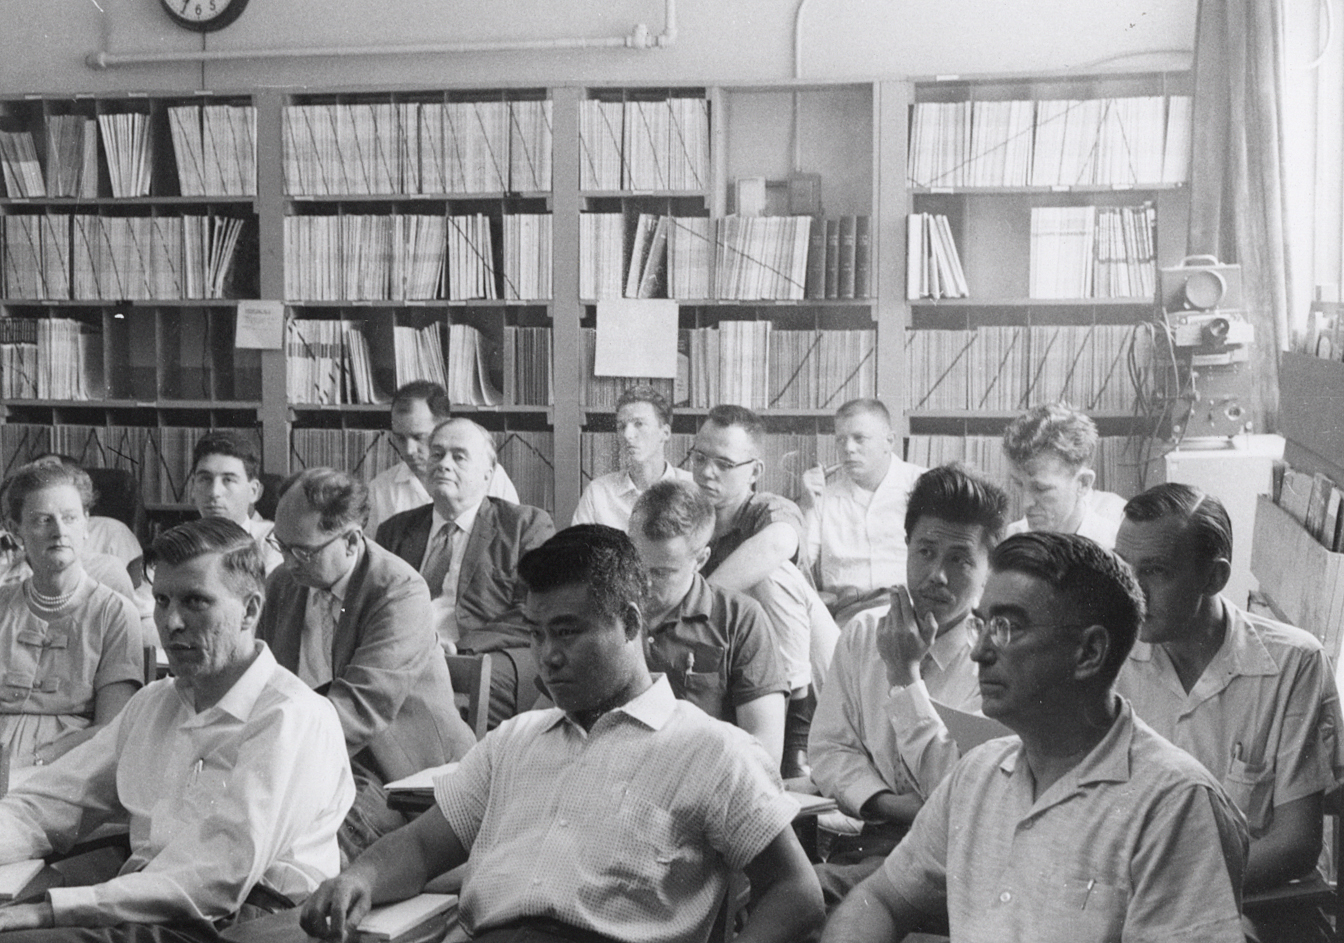   Researchers at Midwestern Universities Research Association (MURA).&nbsp; Ragnar Rollefson (far right), 1959 summer study at Midwestern Universities Research Association (MURA). Photo: University of Wisconsin Madison Archives  